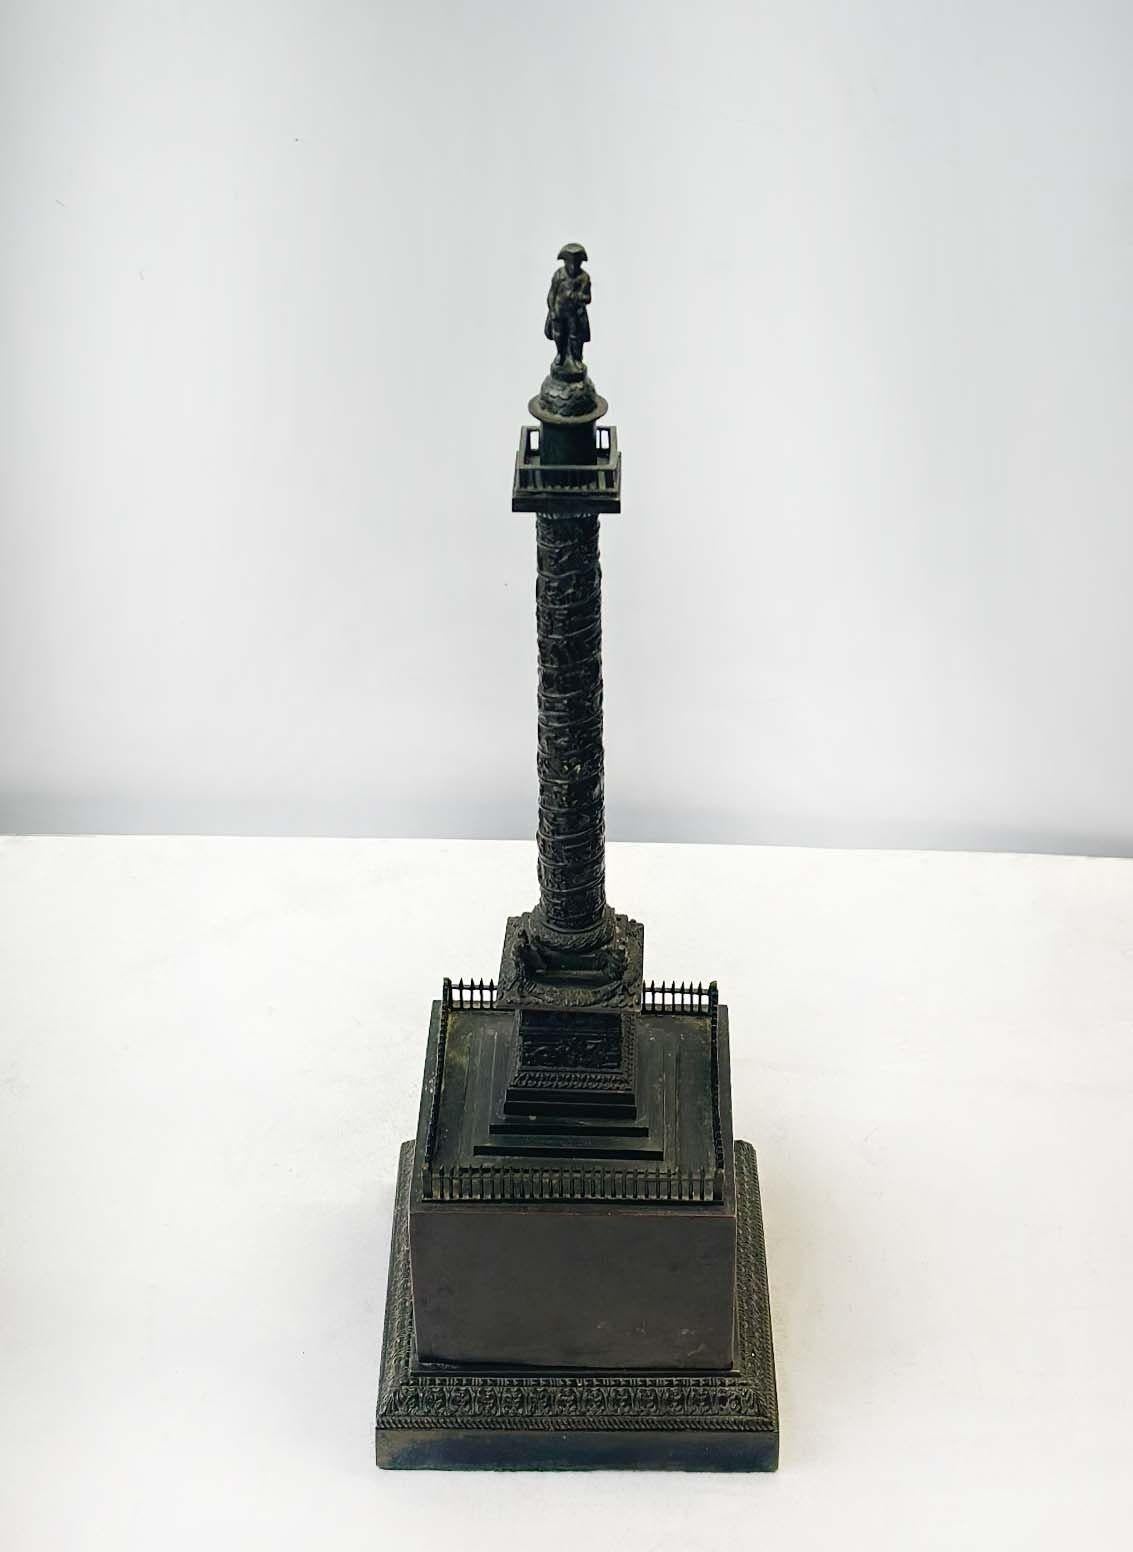 Traditional bronze sculpture of the Vendôme Column with Napoleon standing gracefully on top. The piece is removable, having a depiction of Napoleon's tomb on the inside as well.
These statues are collectible, mostly posh kids that upon completing